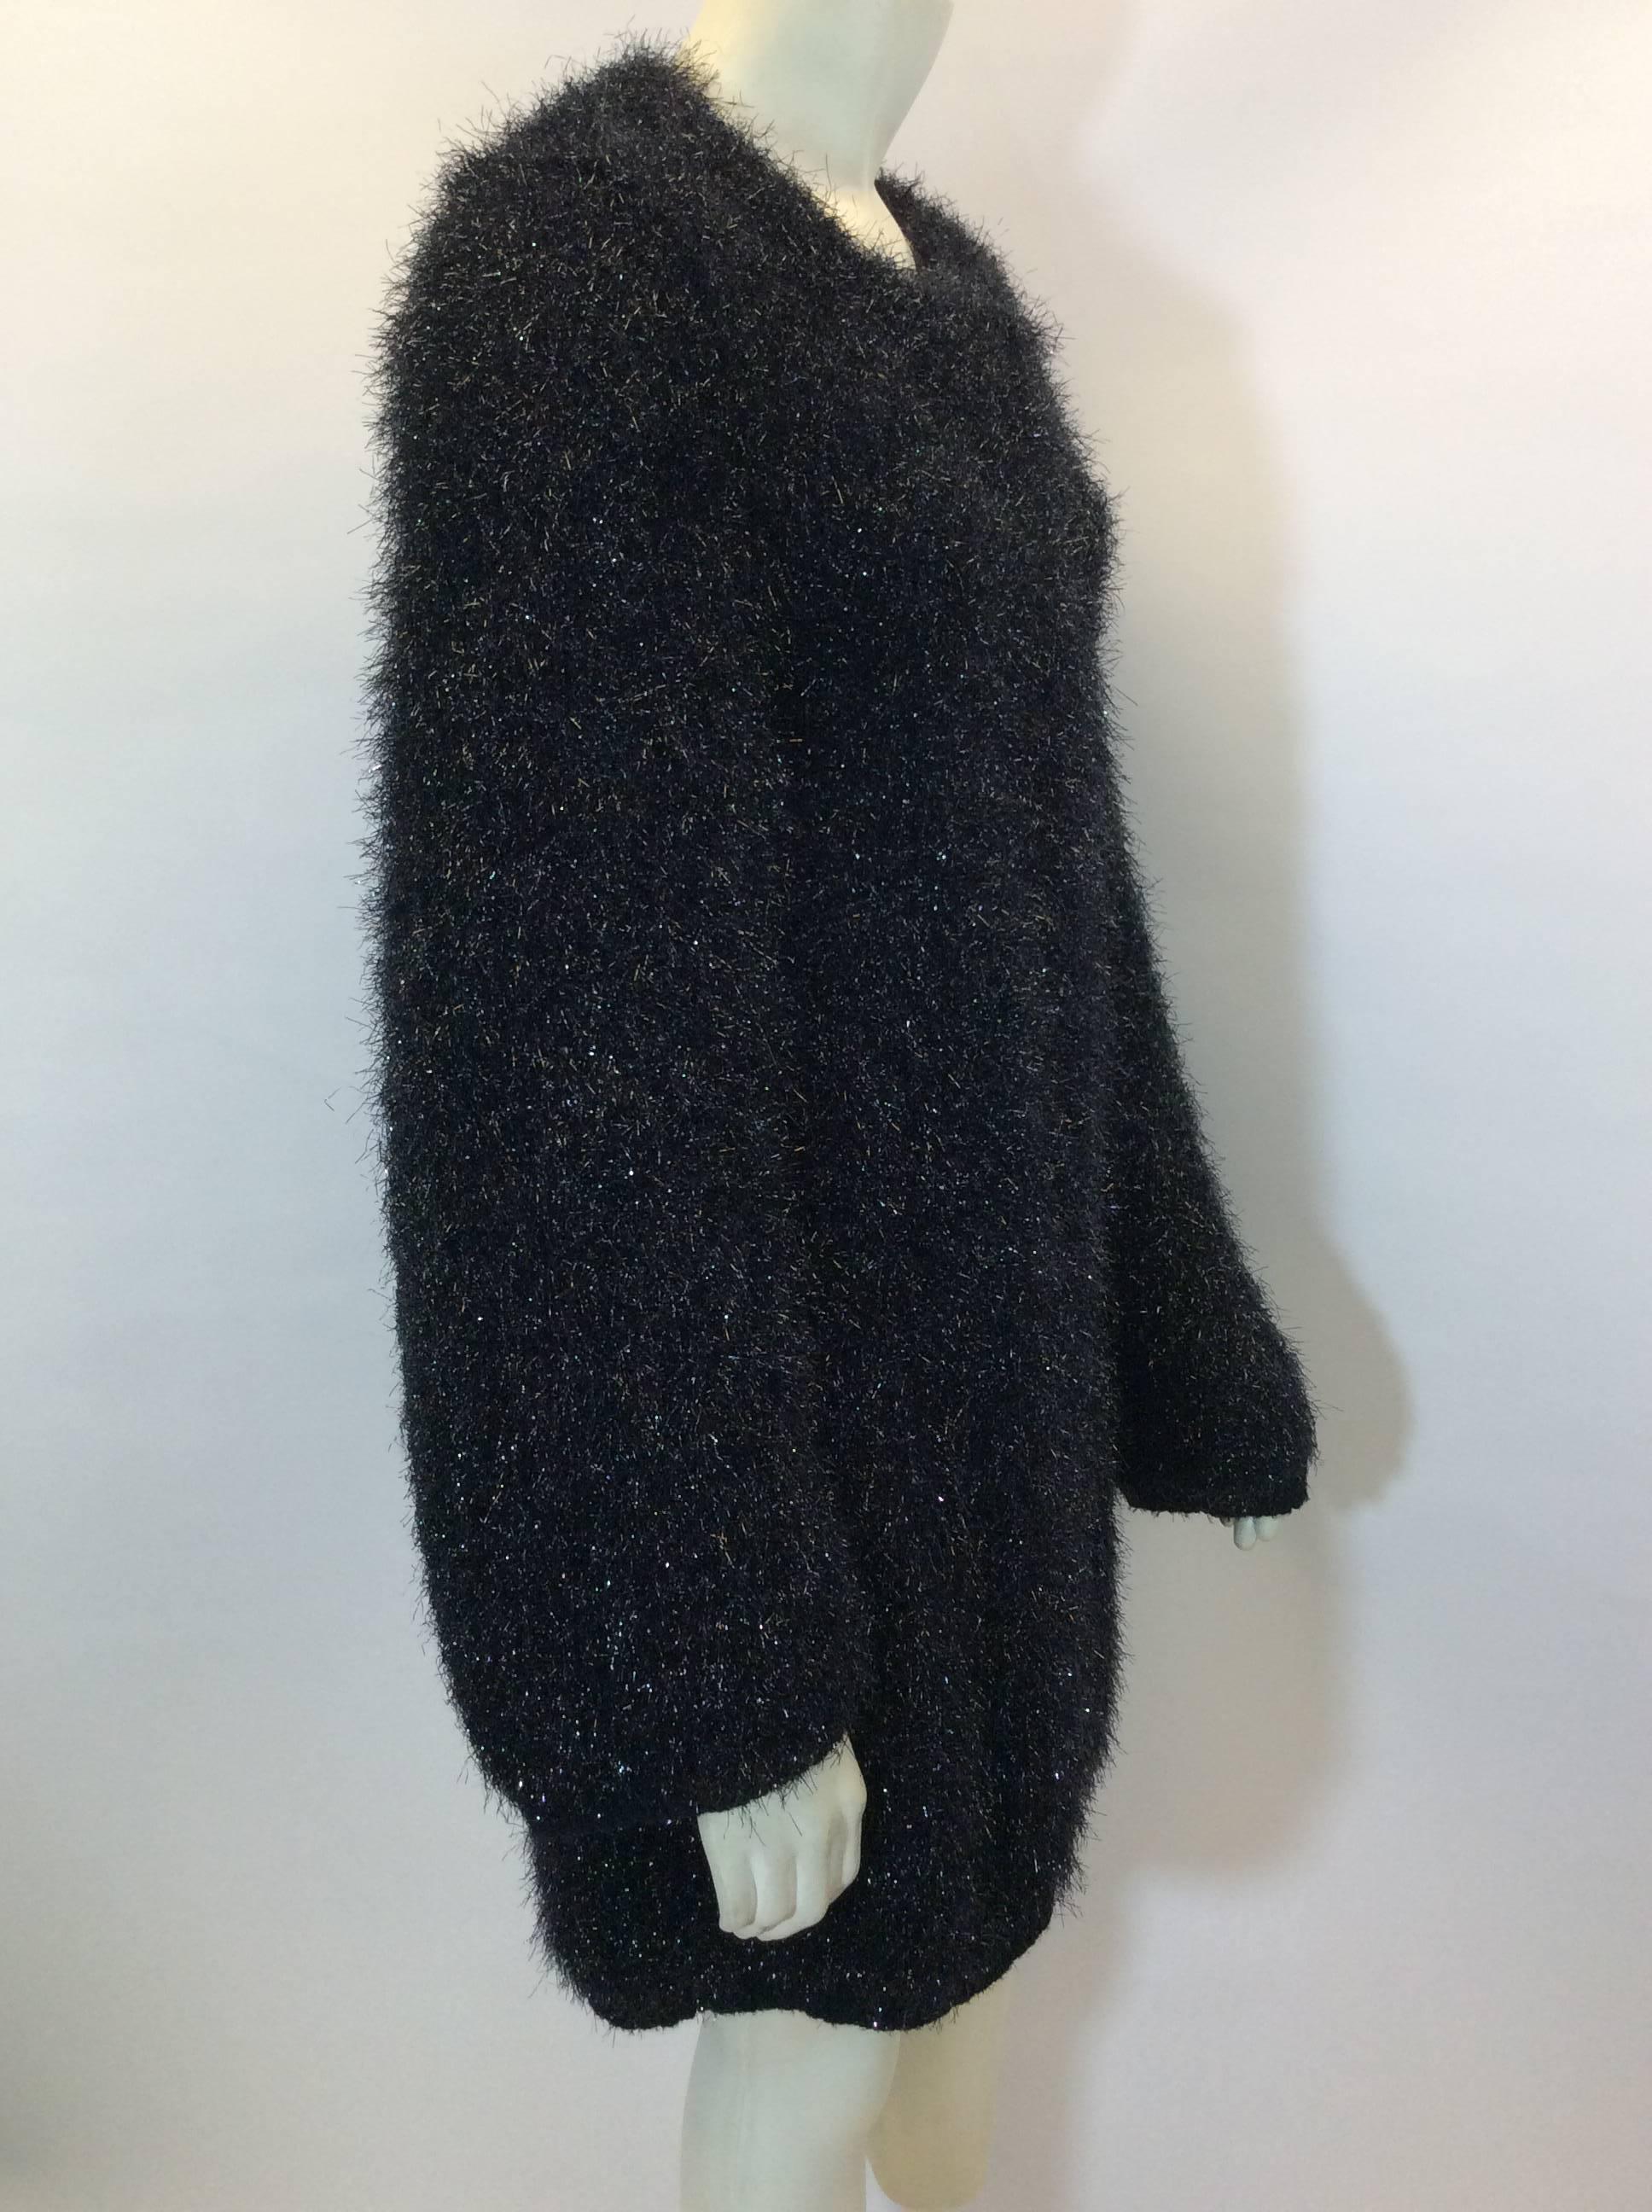 Sonia Rykiel Black Fuzz Coat In Excellent Condition For Sale In Narberth, PA